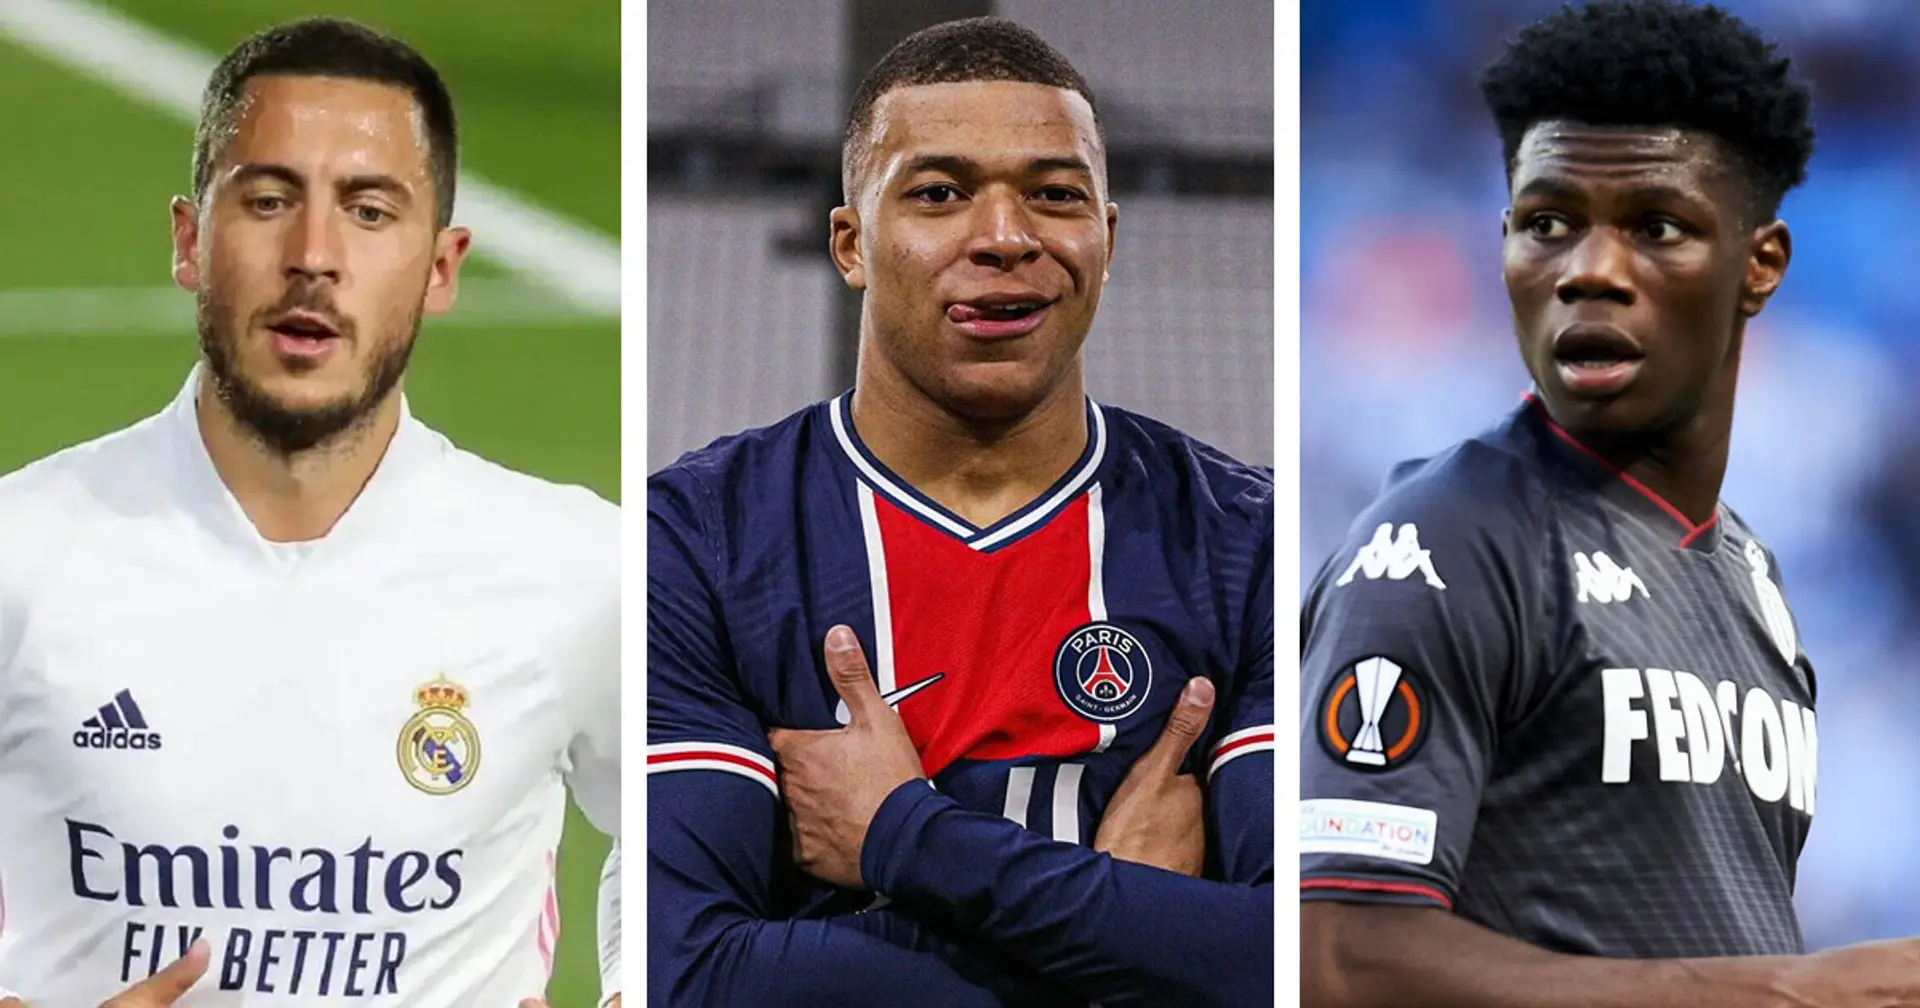 Mbappe discusses his future and 3 more big stories you might've missed